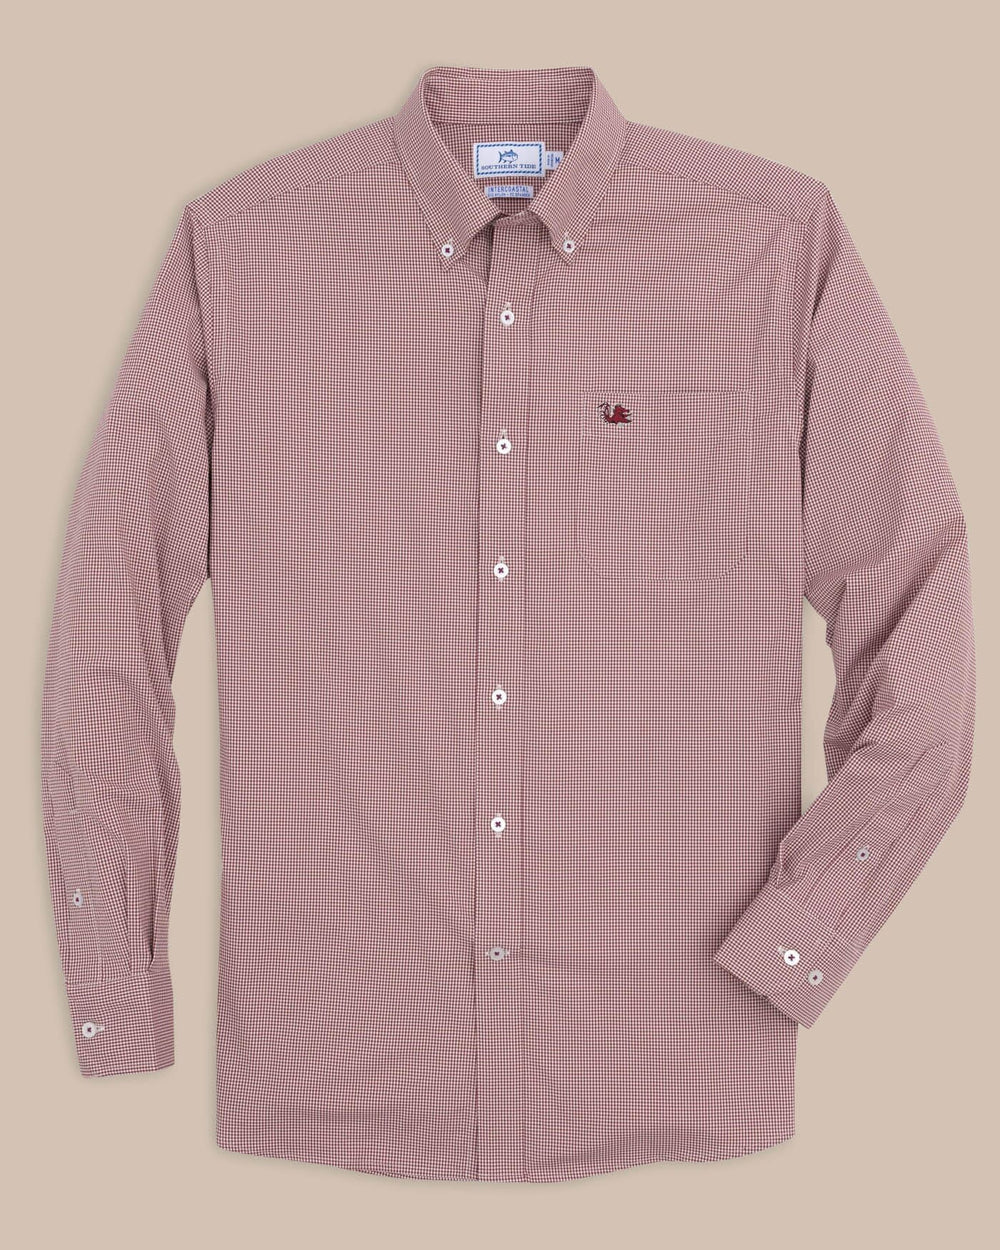 The front view of the Men's Red USC Gamecocks Gingham Button Down Shirt by Southern Tide - Chianti